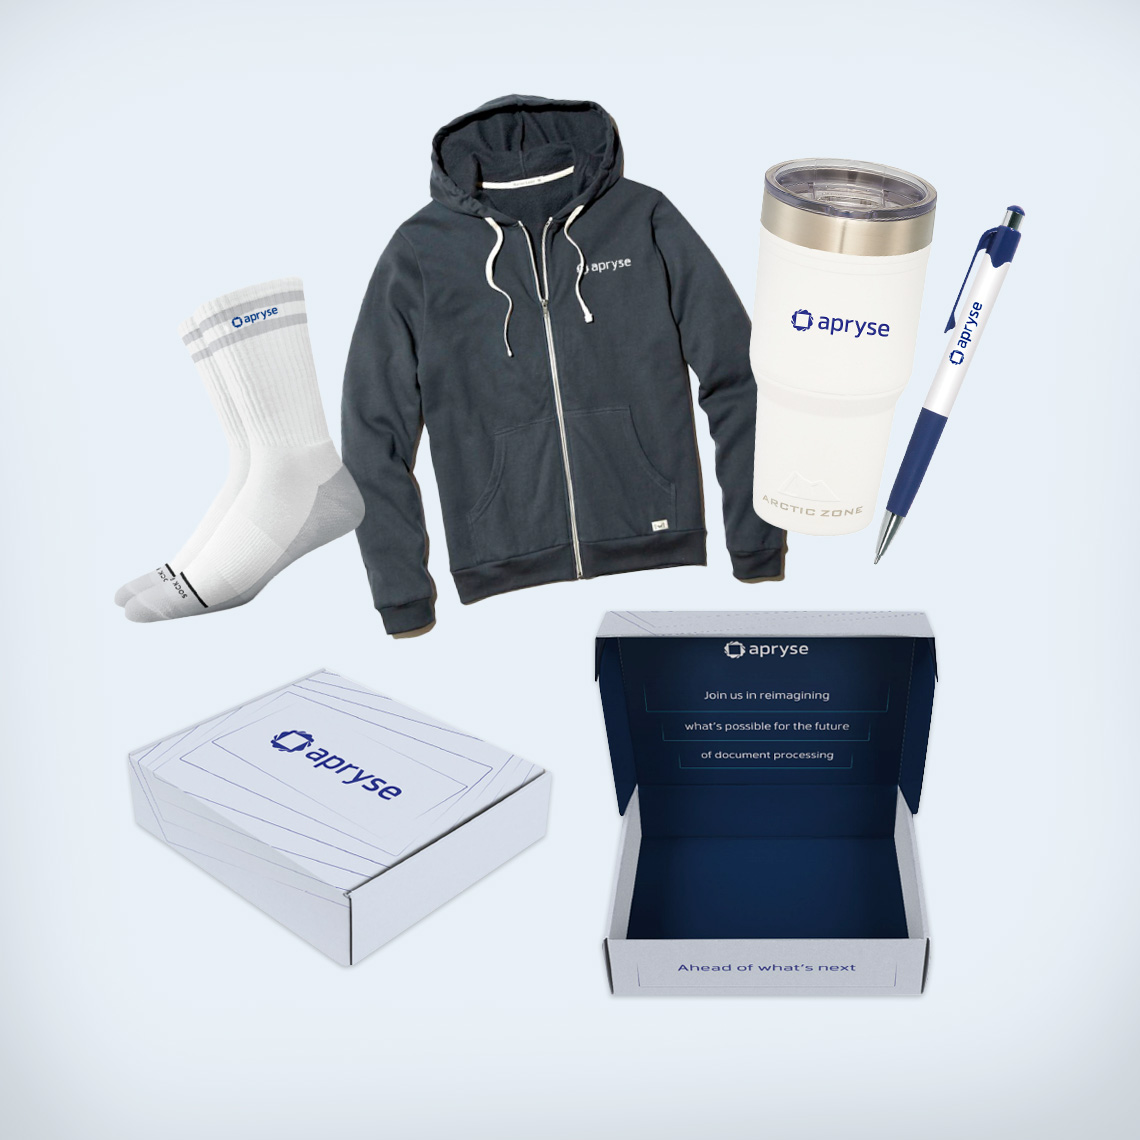 Marketing materials including swag items like socks, jacket, mugs, pens, and notepads designed for Apryse